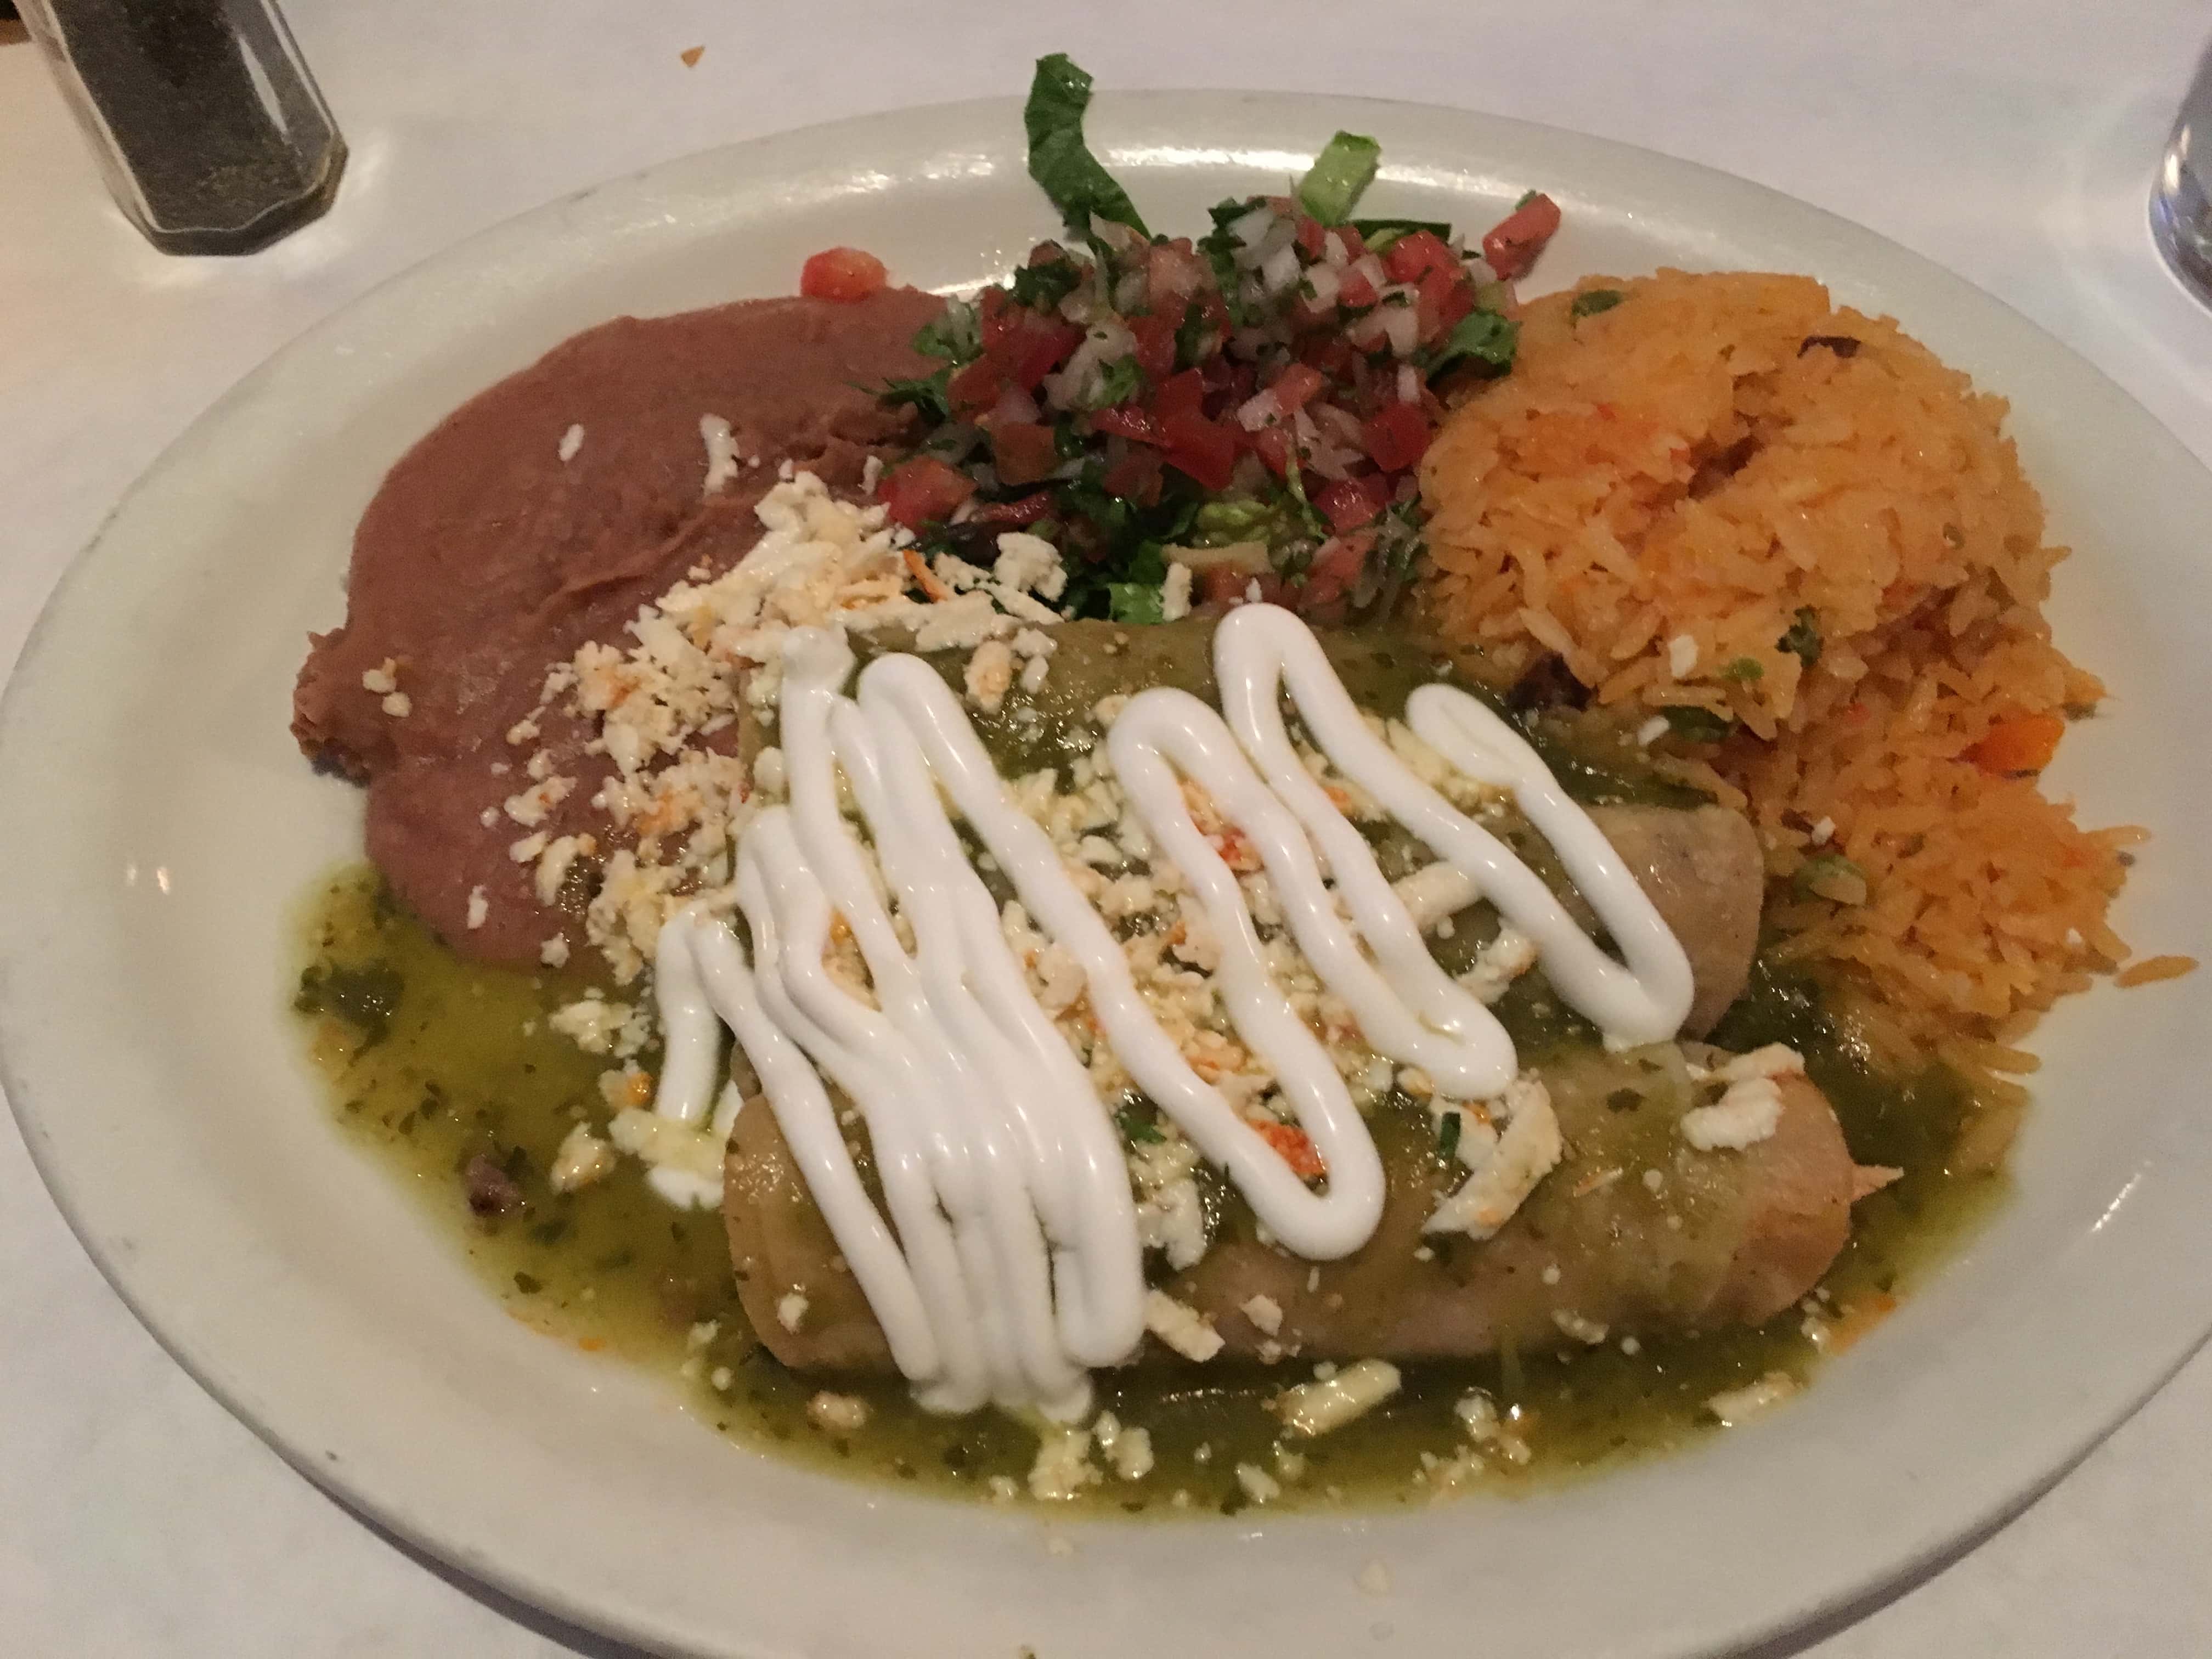 Enchilada lunch special at La Cantina Grill in Chicago, Illinois